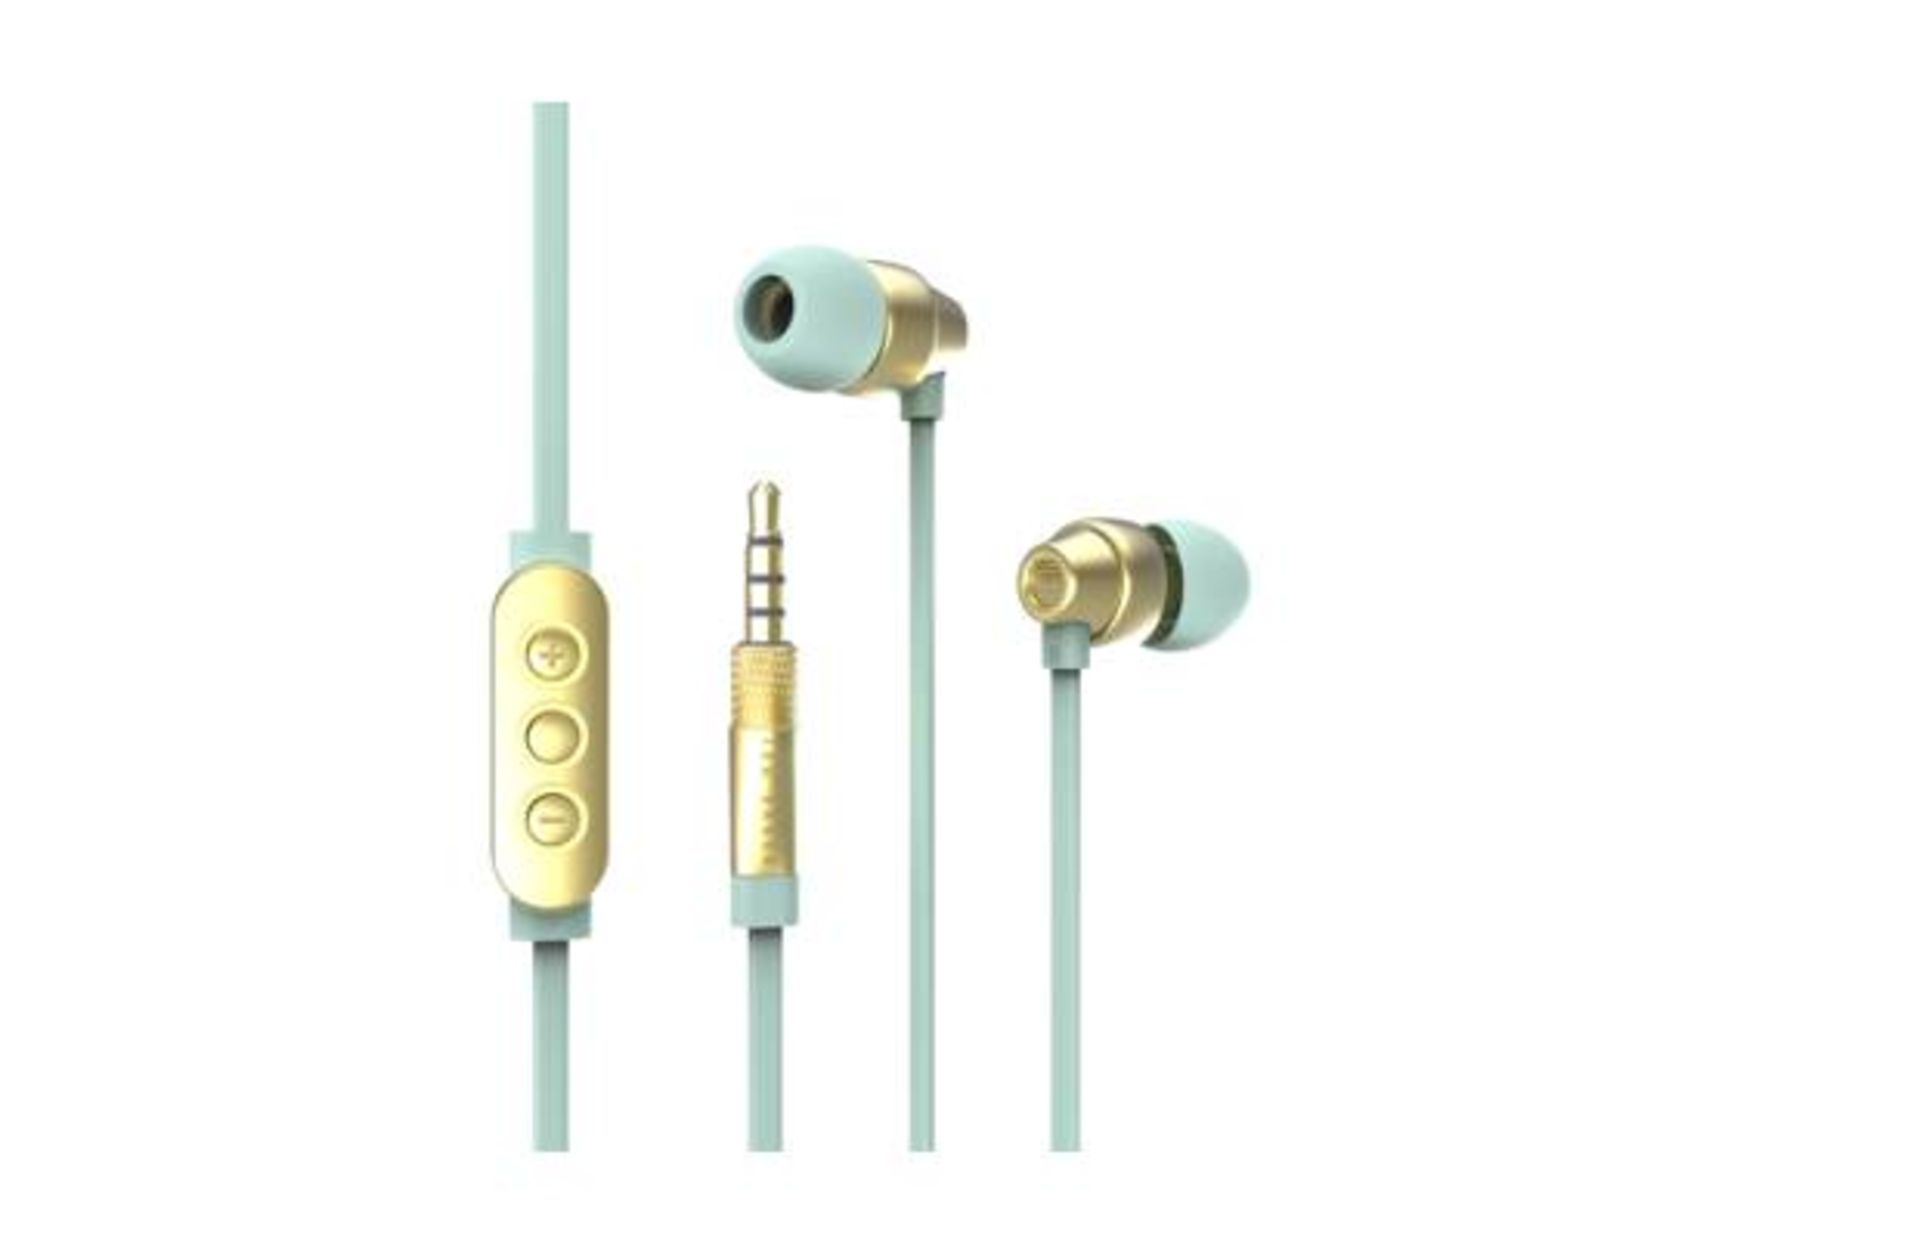 V *TRADE QTY* Brand New Ted Baker Dover In-Ear Headphones In Mint/Gold RRP£59.95 eBay£39.99 X120